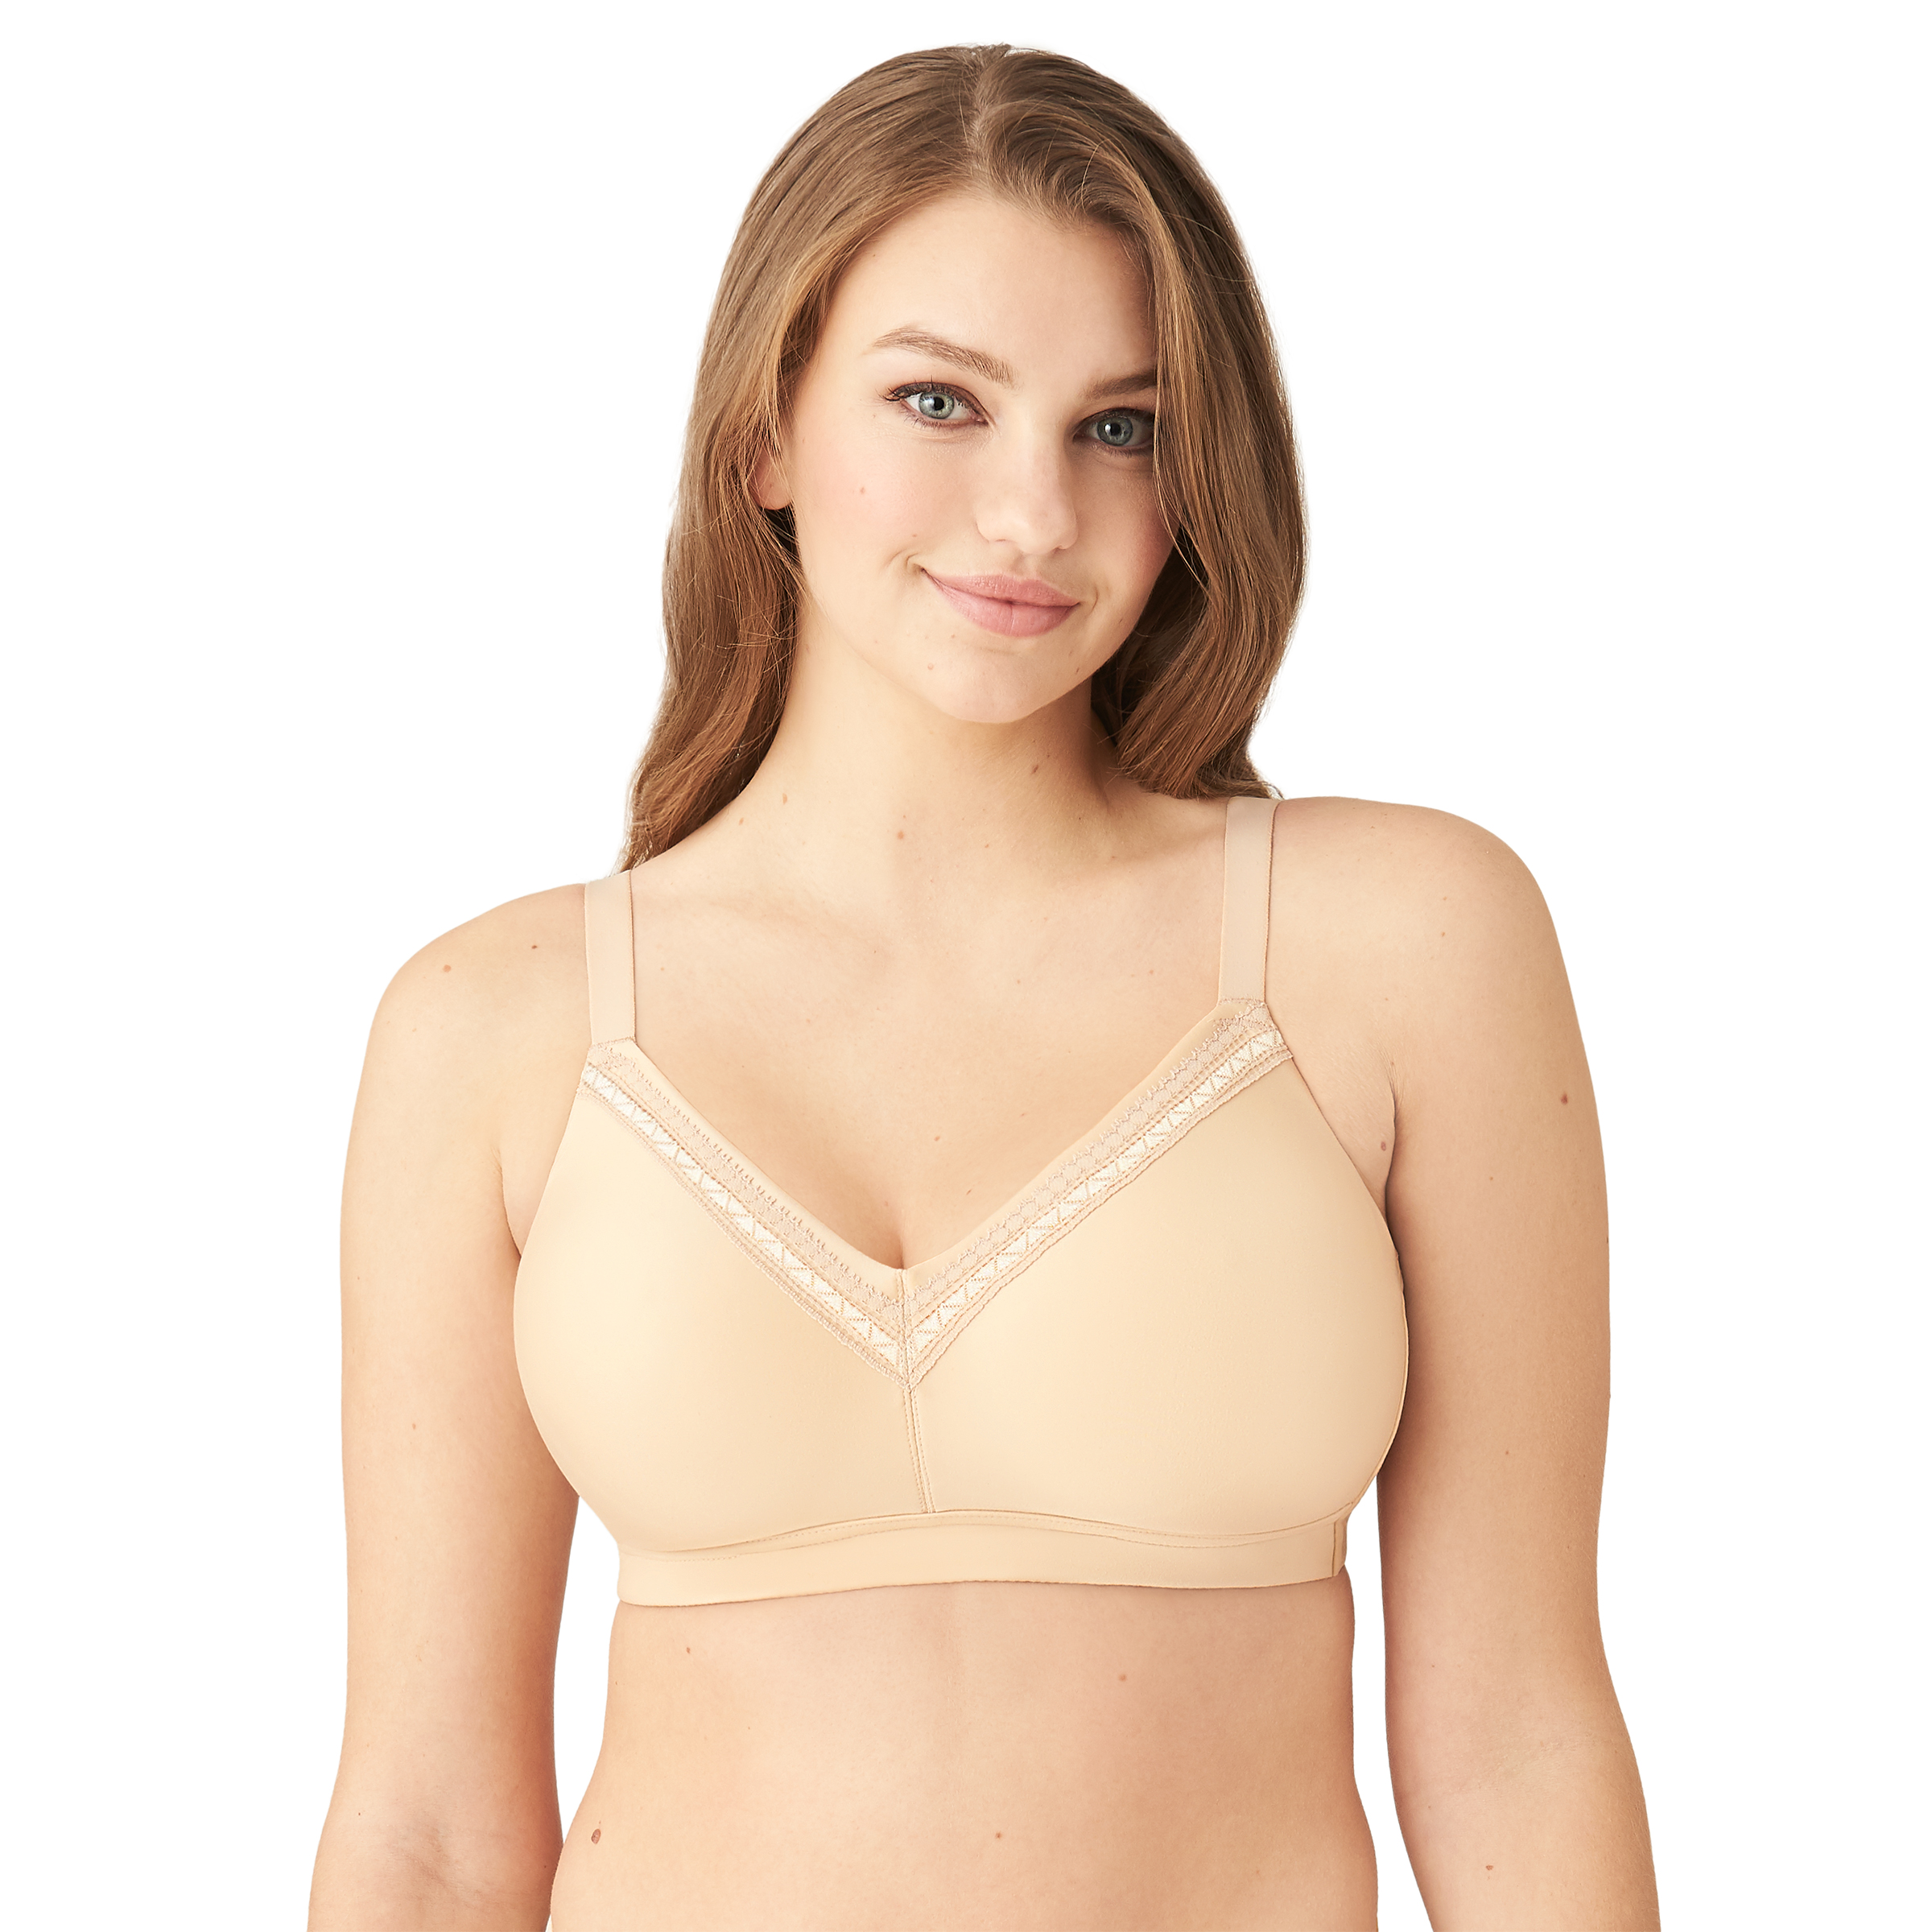 Wacoal 855213 Perfect Primer Marshmallow Soft Underwire [855213] : Bras,  Nursing Bras, Shapers, Slips, Panties, All-In-Ones, Camisoles WOB Lingerie